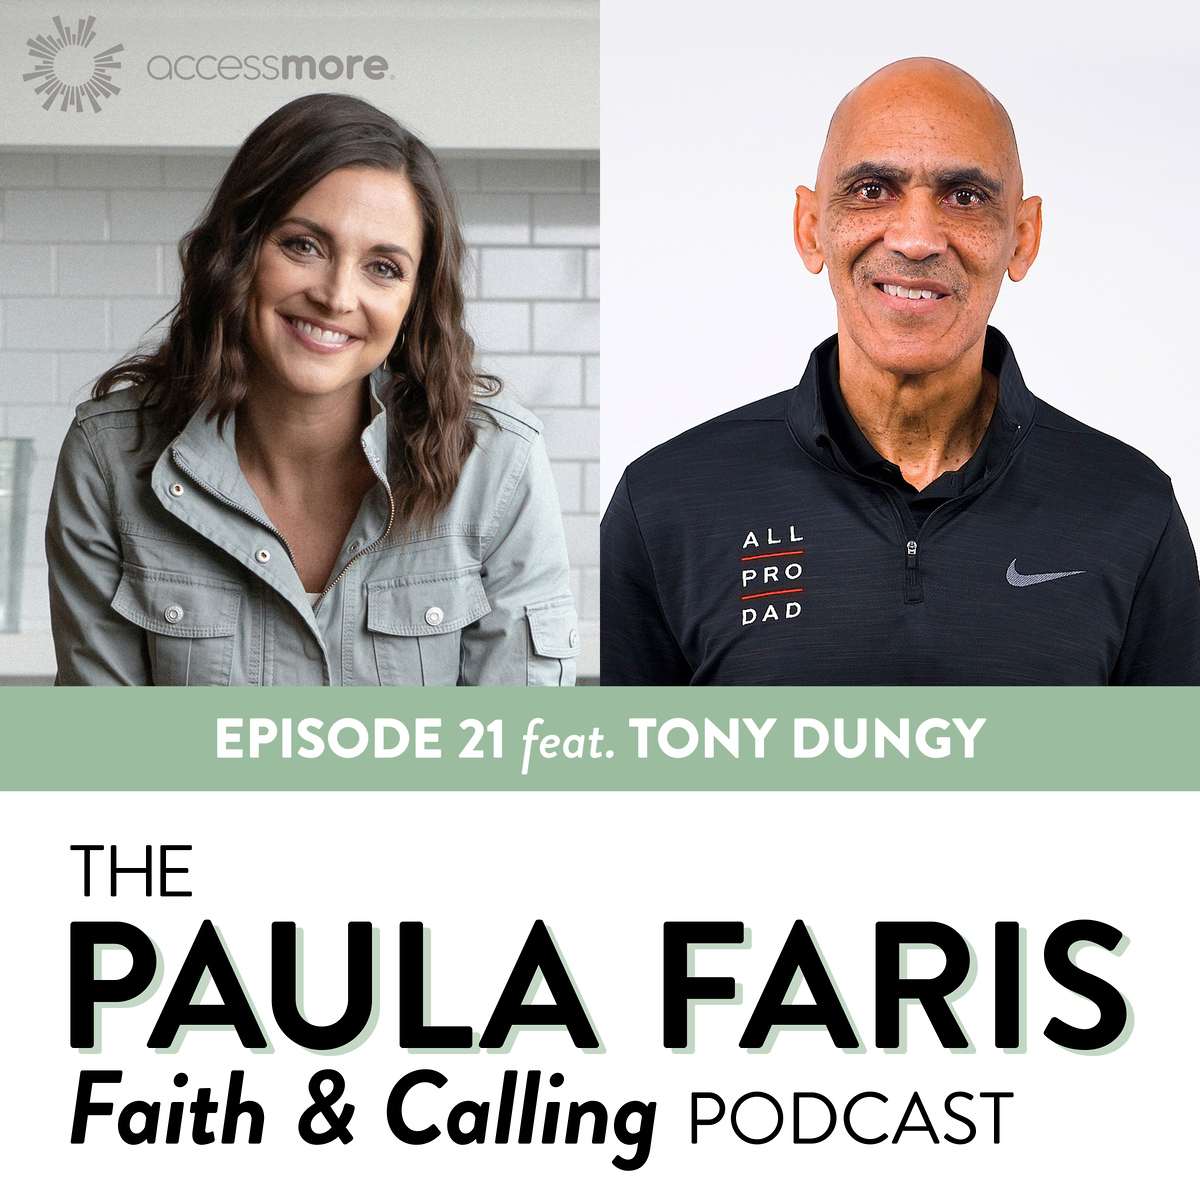 Tony Dungy: From Super Bowl coach to 'All Pro Dad'